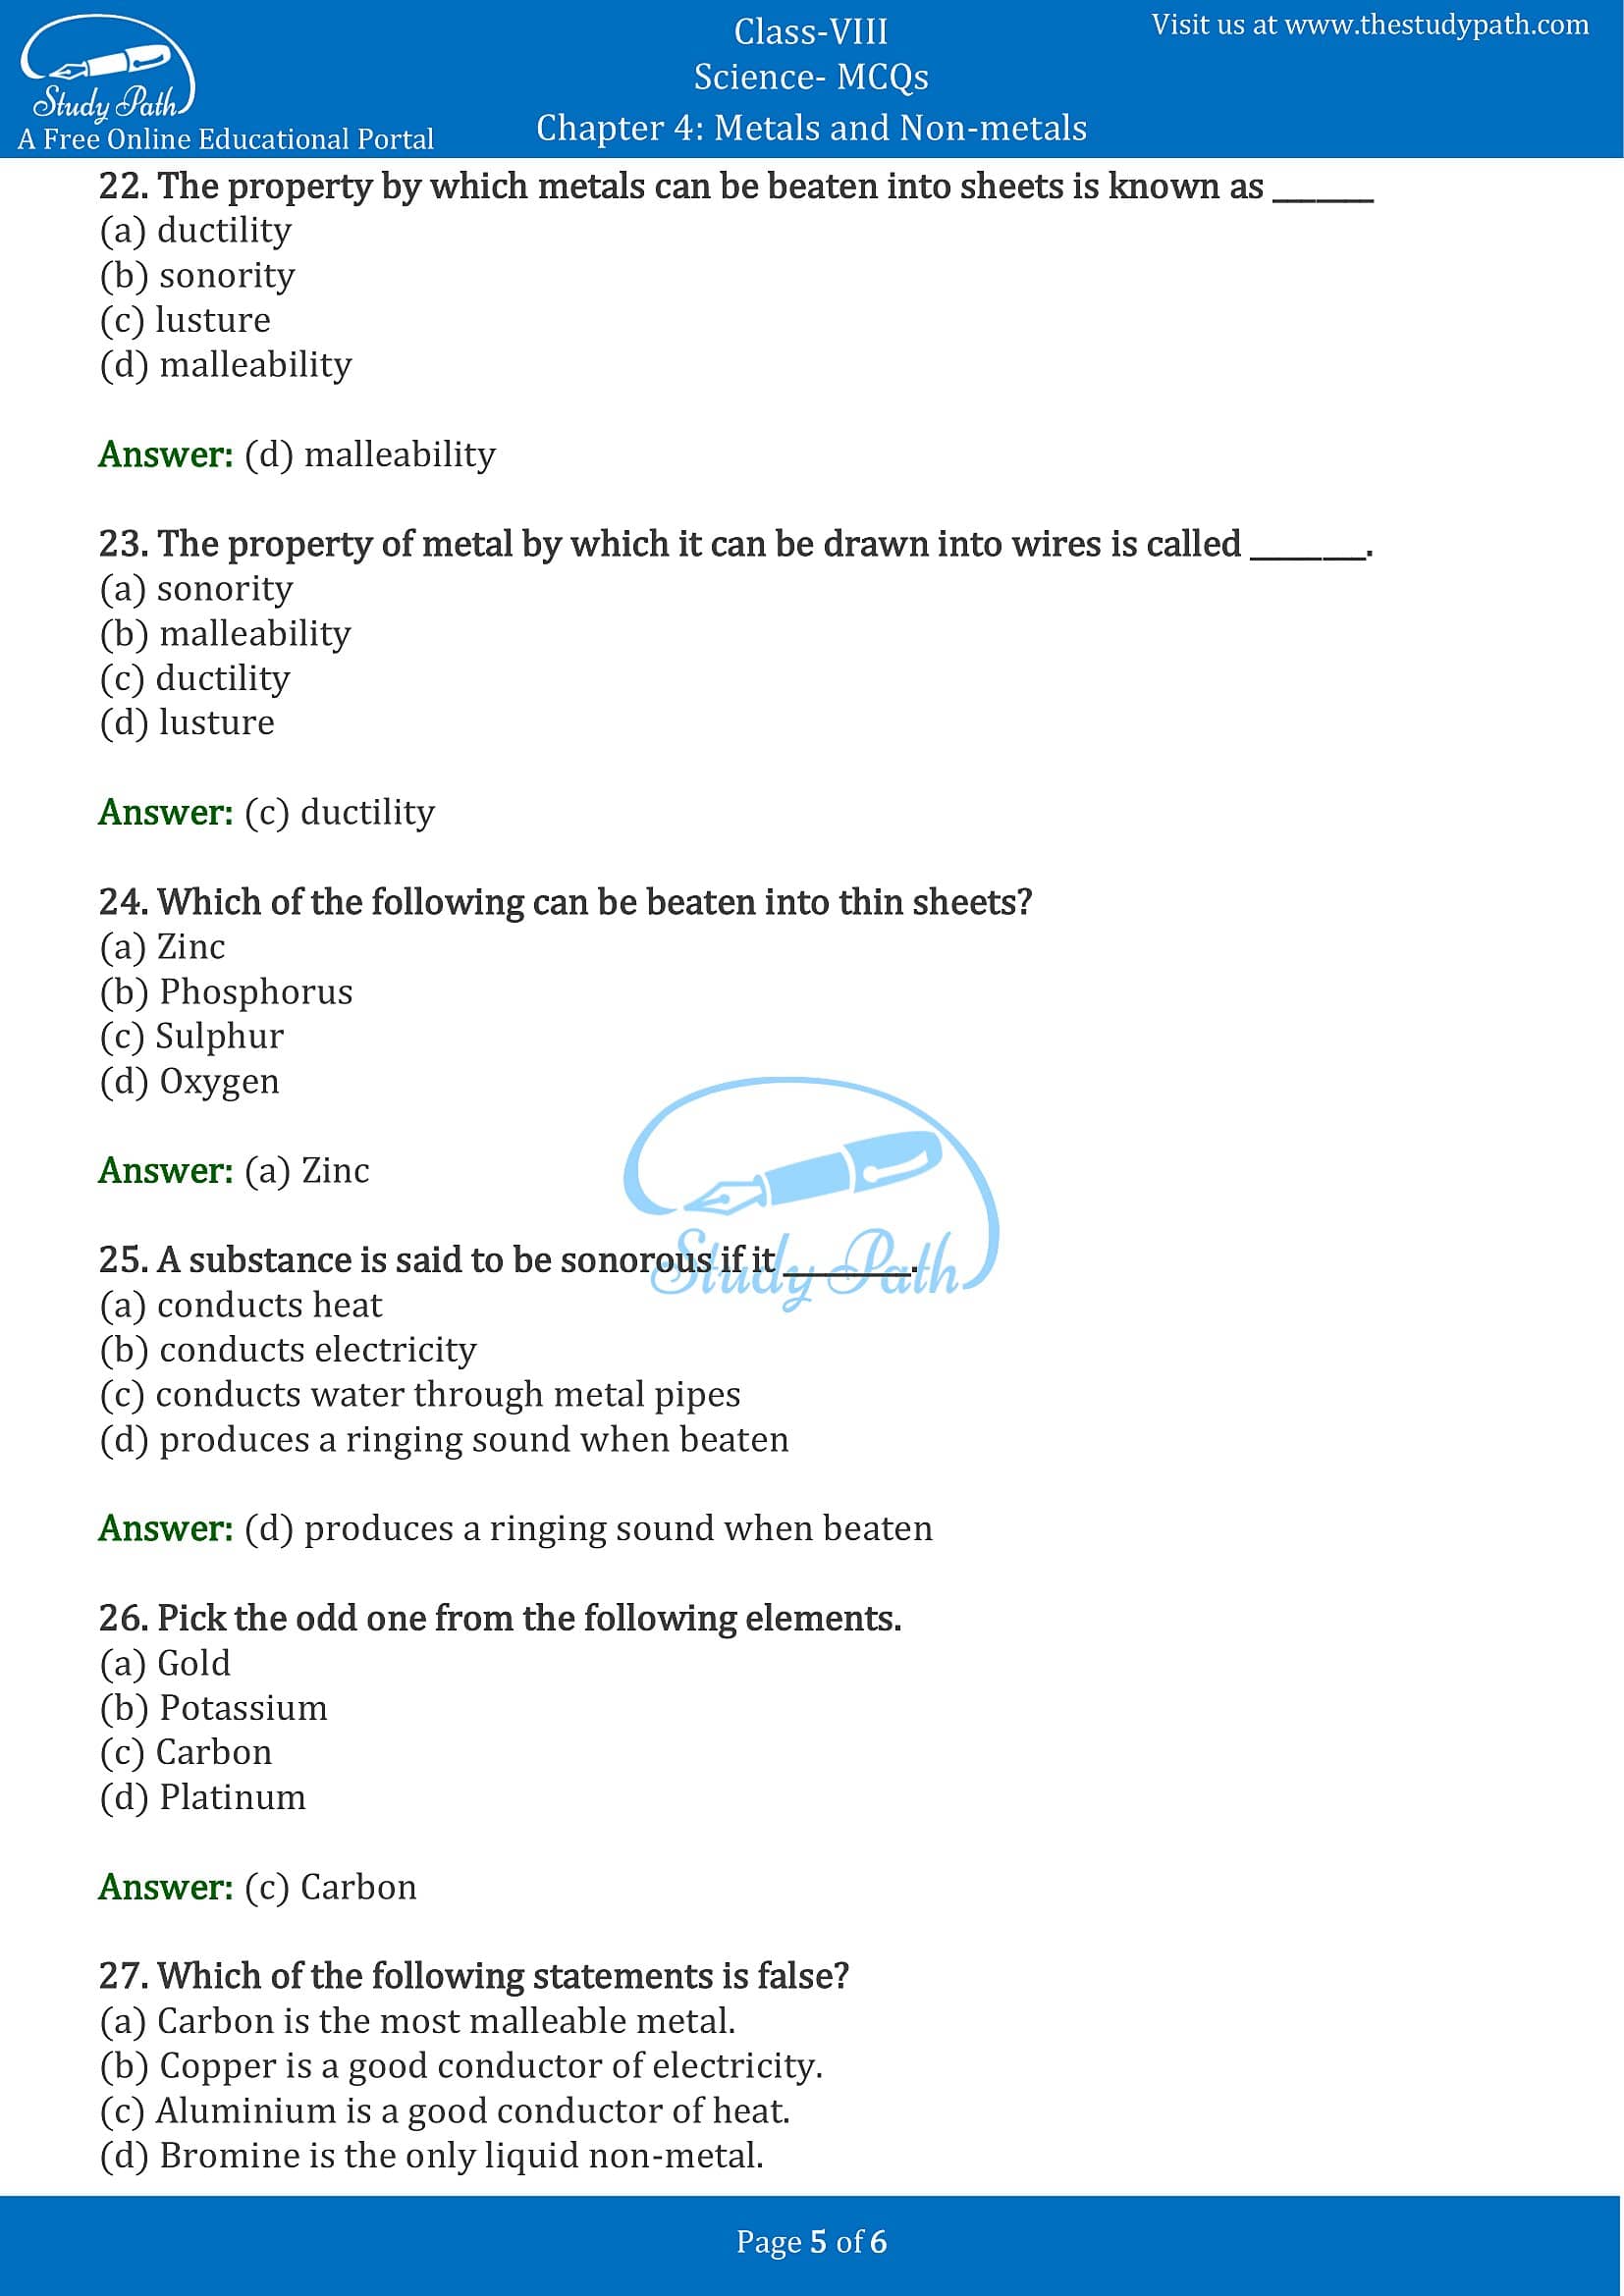 MCQ Questions for Class 8 Science Chapter 4 Metals and Non-metals with Answers PDF -5